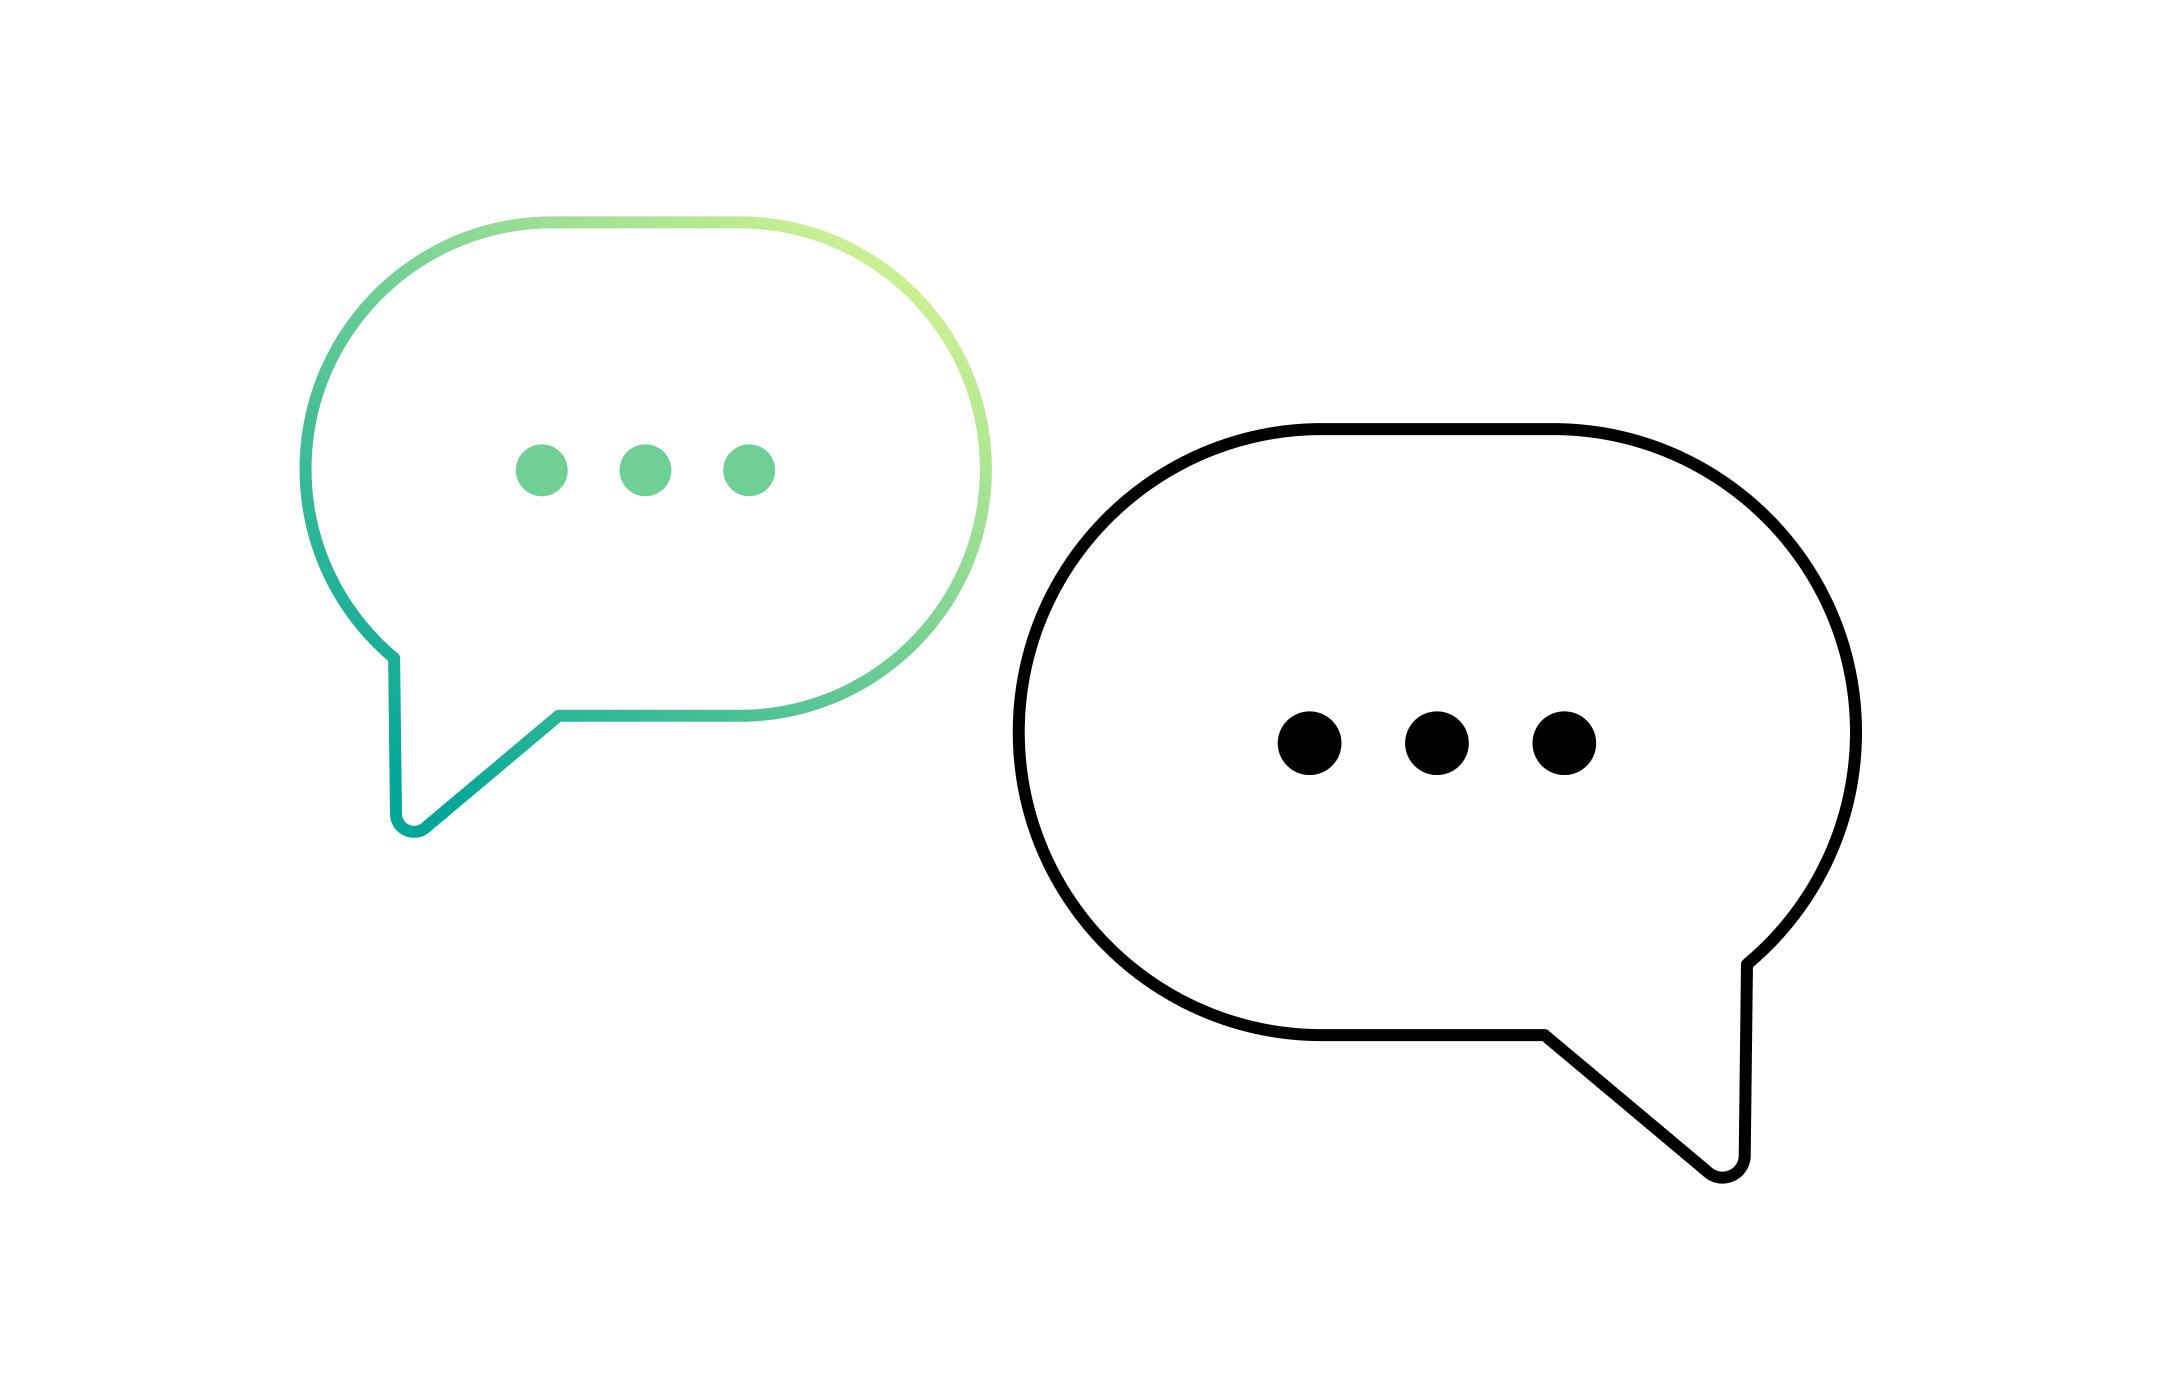 Animated image of two conversation bubbles.